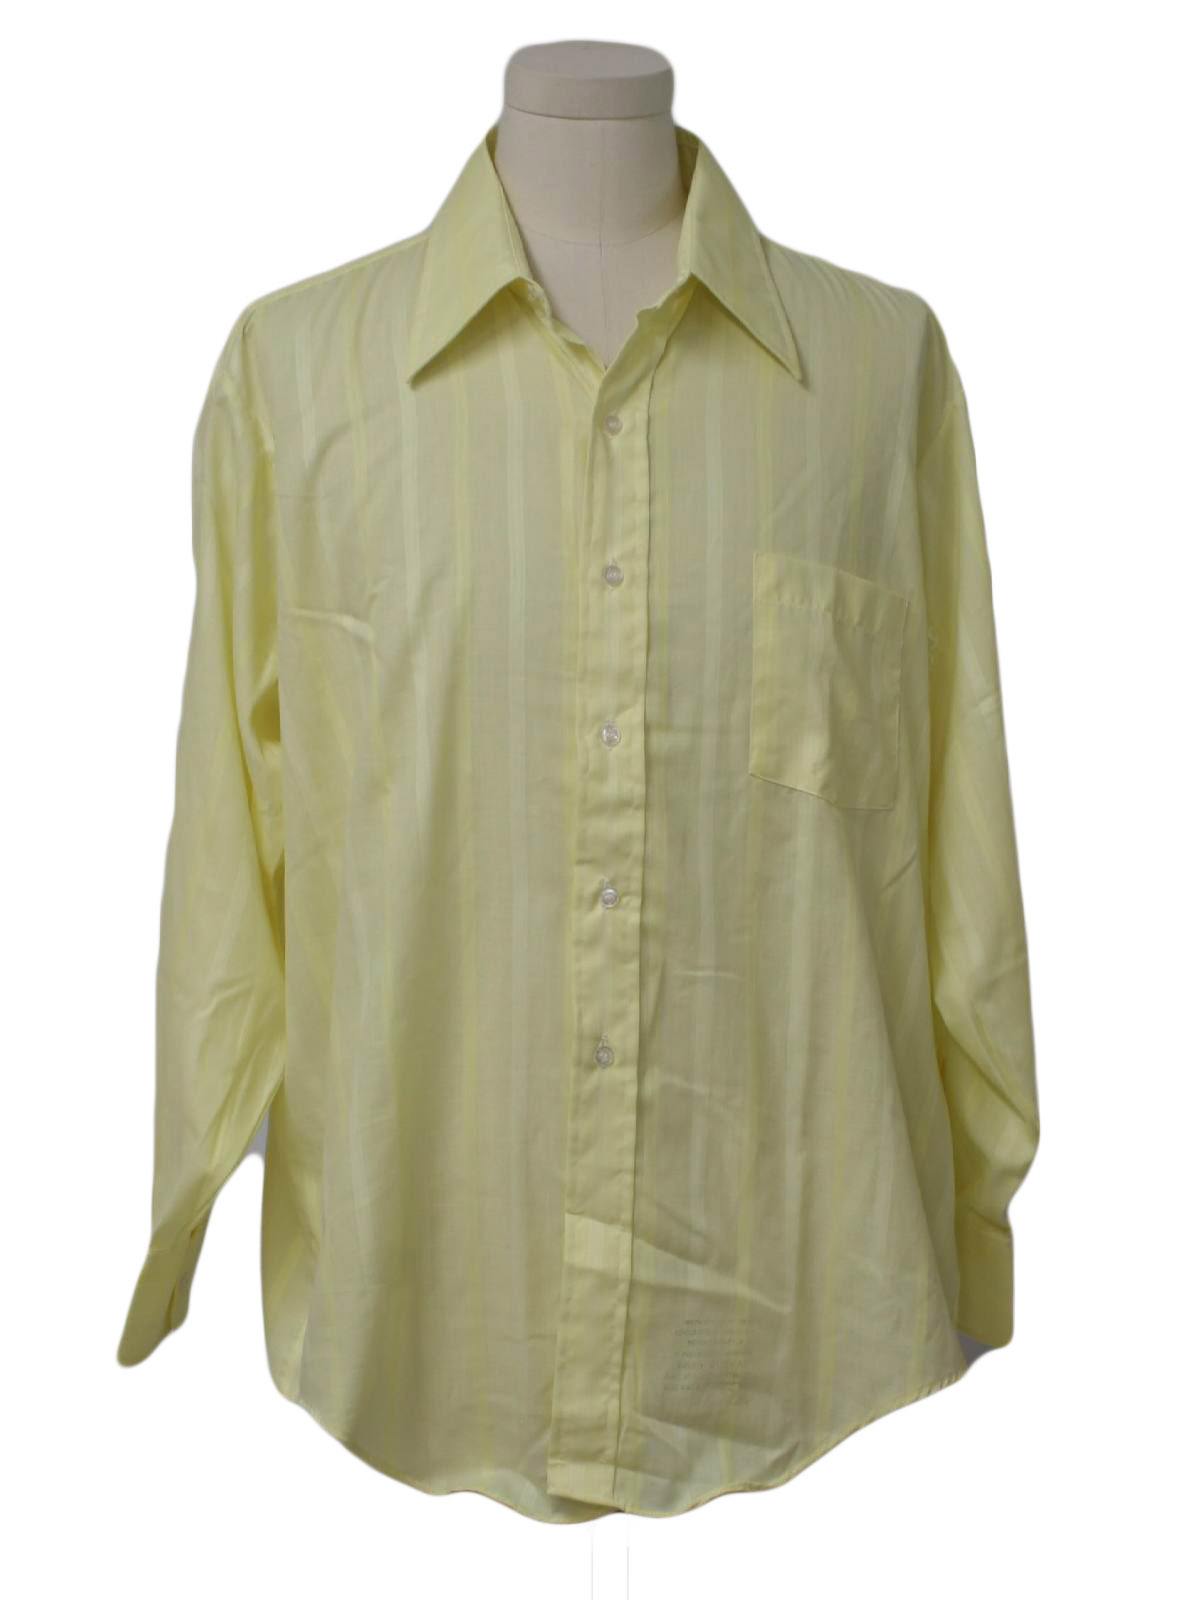 Retro Seventies Shirt: 70s -Arrow- Mens yellow background with subtle ...